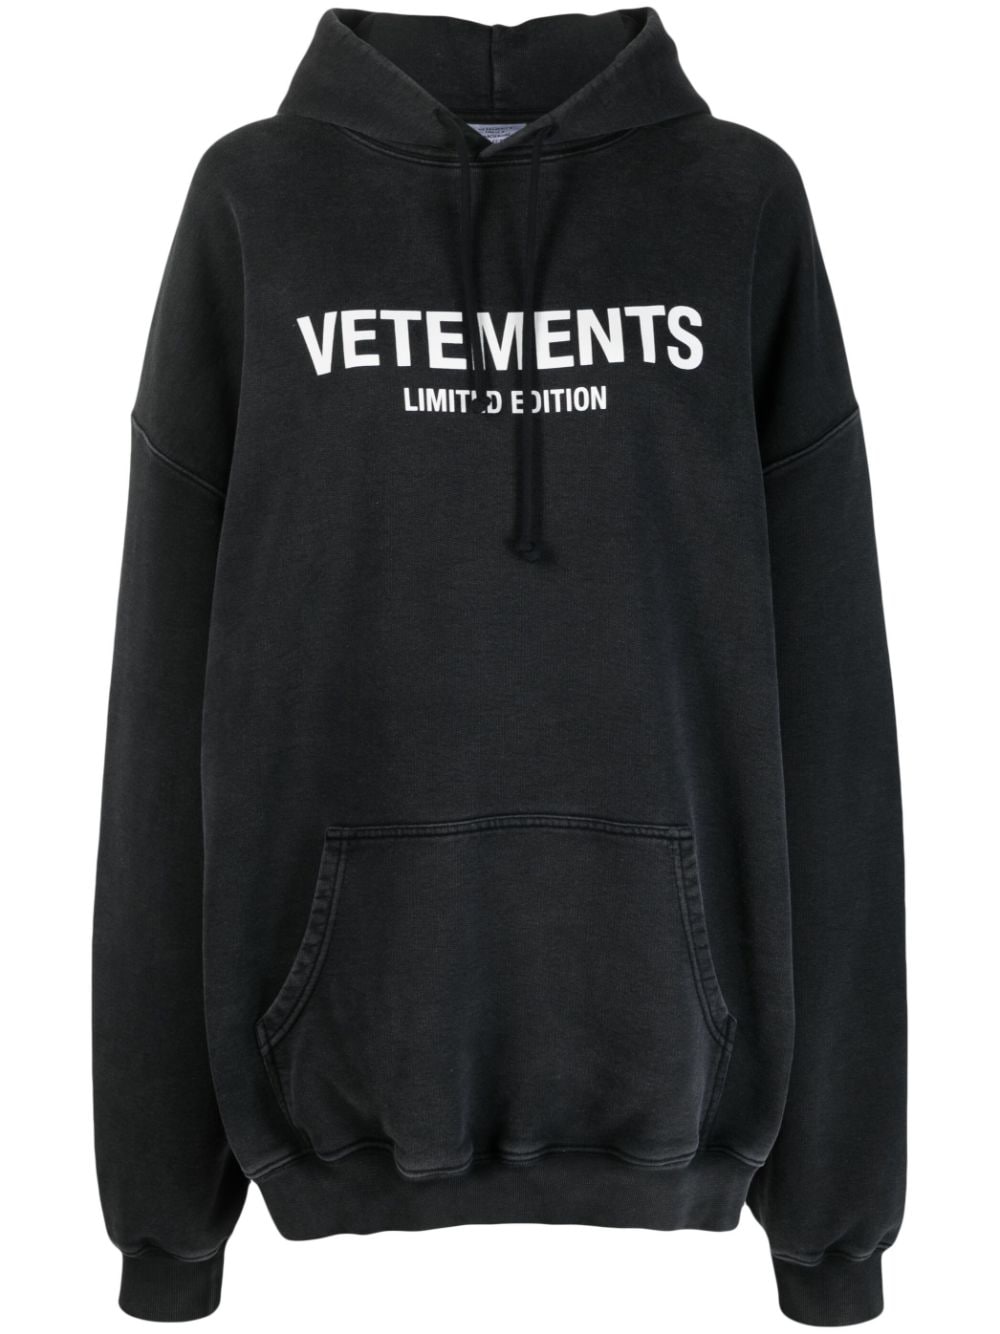 VETEMENTS Classic Black Logo Hoodie for Women - FW23 Collection